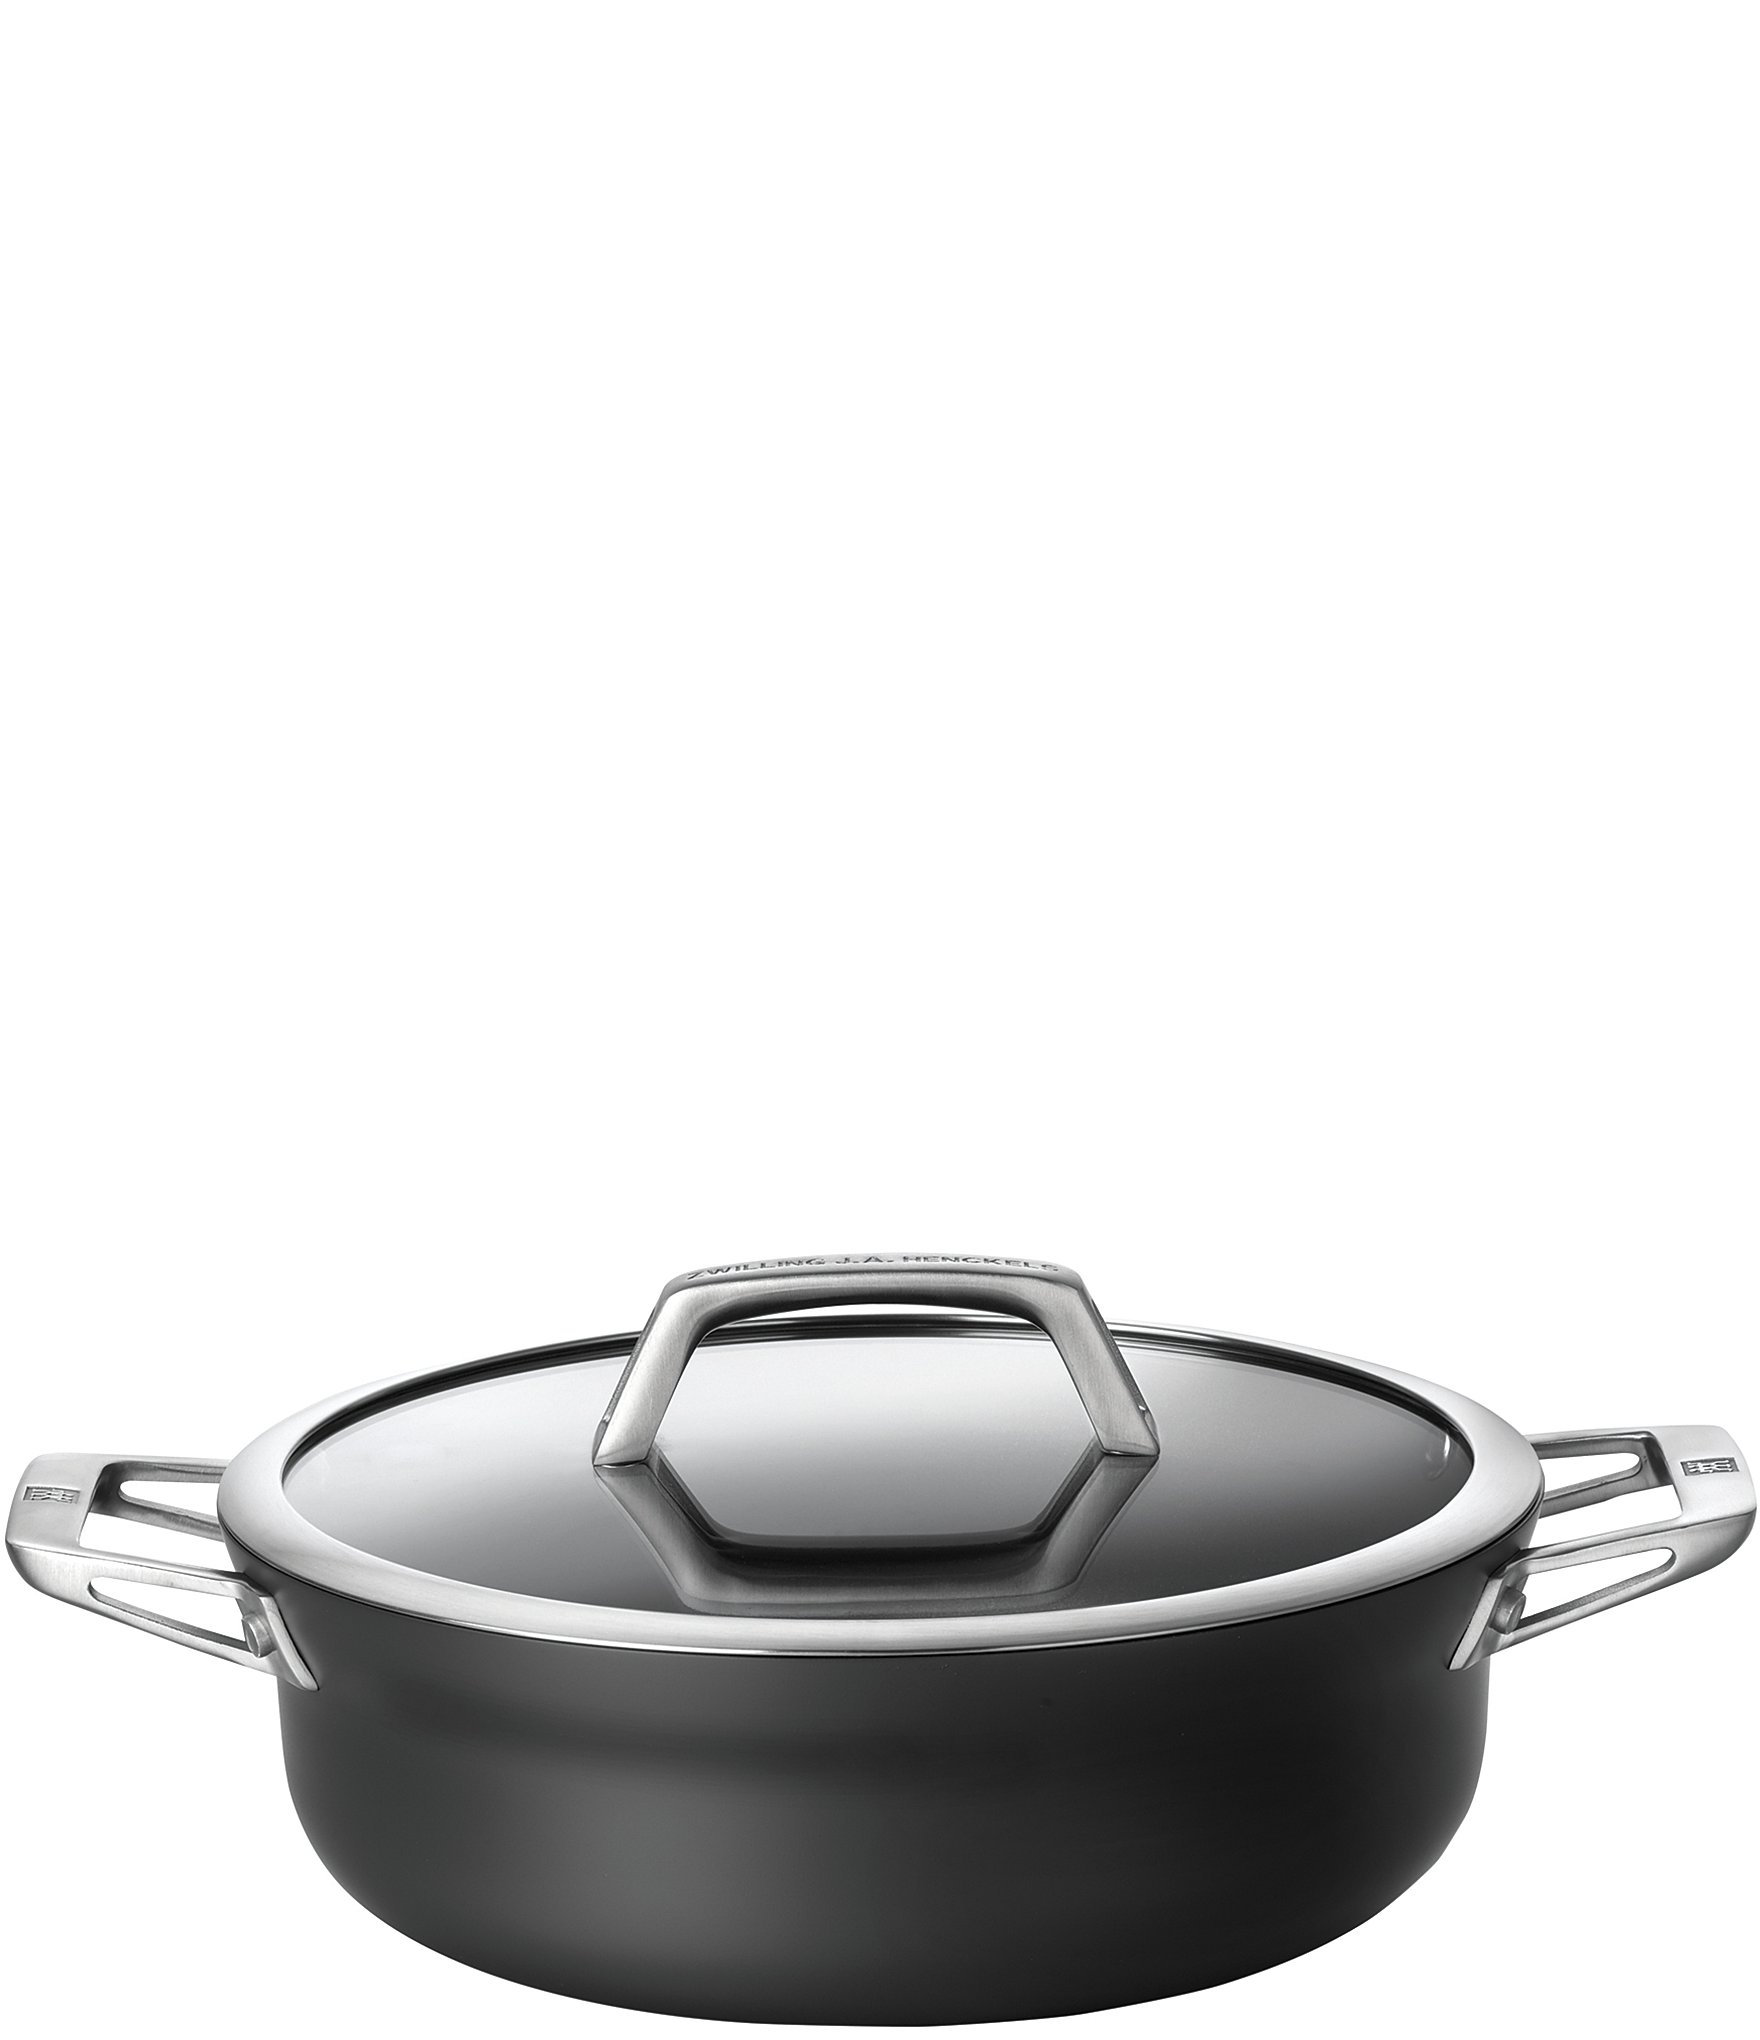 Zwilling Motion Hard Anodized Collection 10-Piece Nonstick Cookware Set